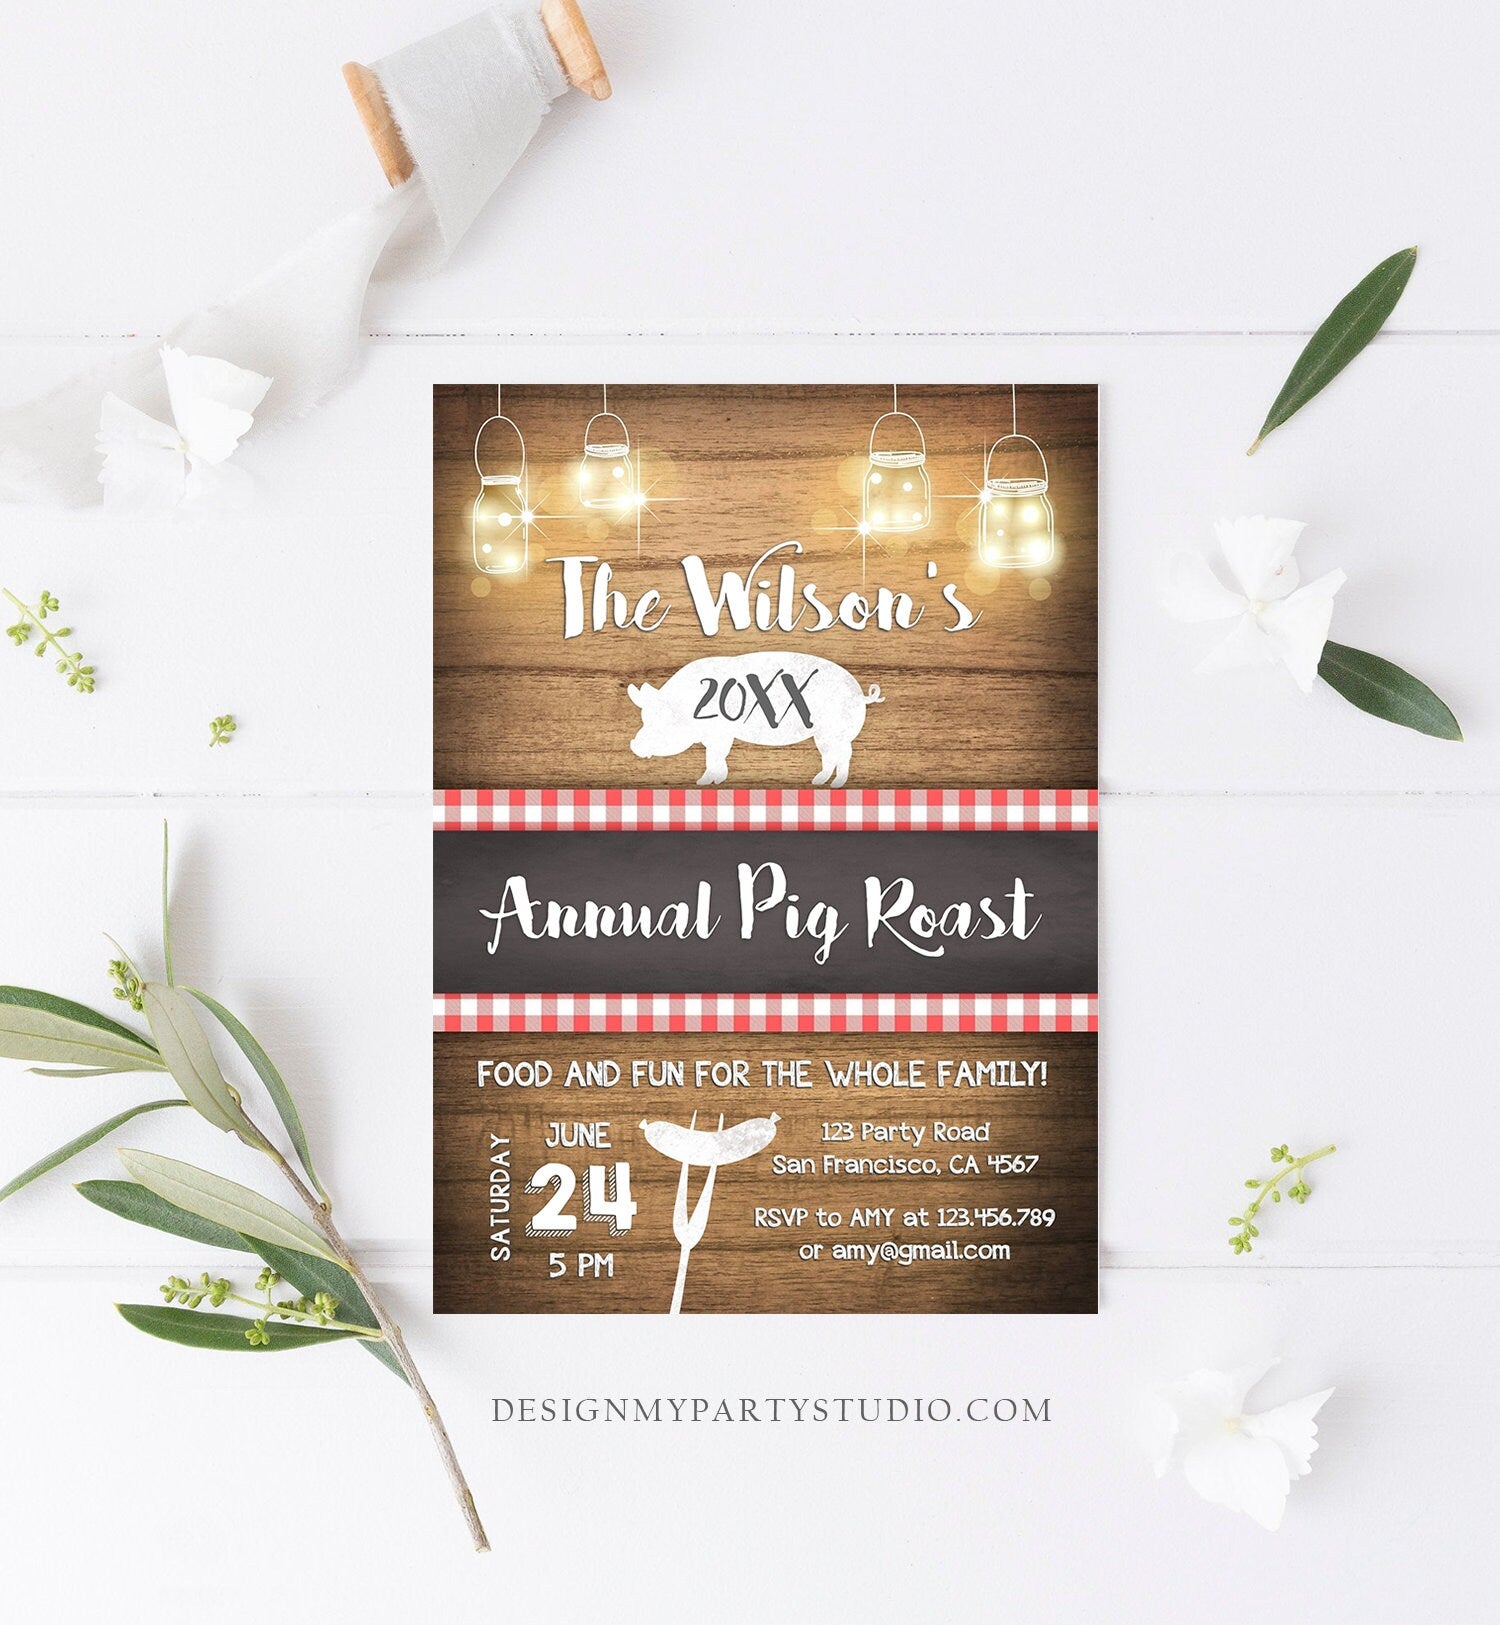 Editable Pig Roast Invitation Rustic Wood Backyard BBQ Birthday Family Party Couples Shower Vintage Outdoor Barbecue Country Corjl Template